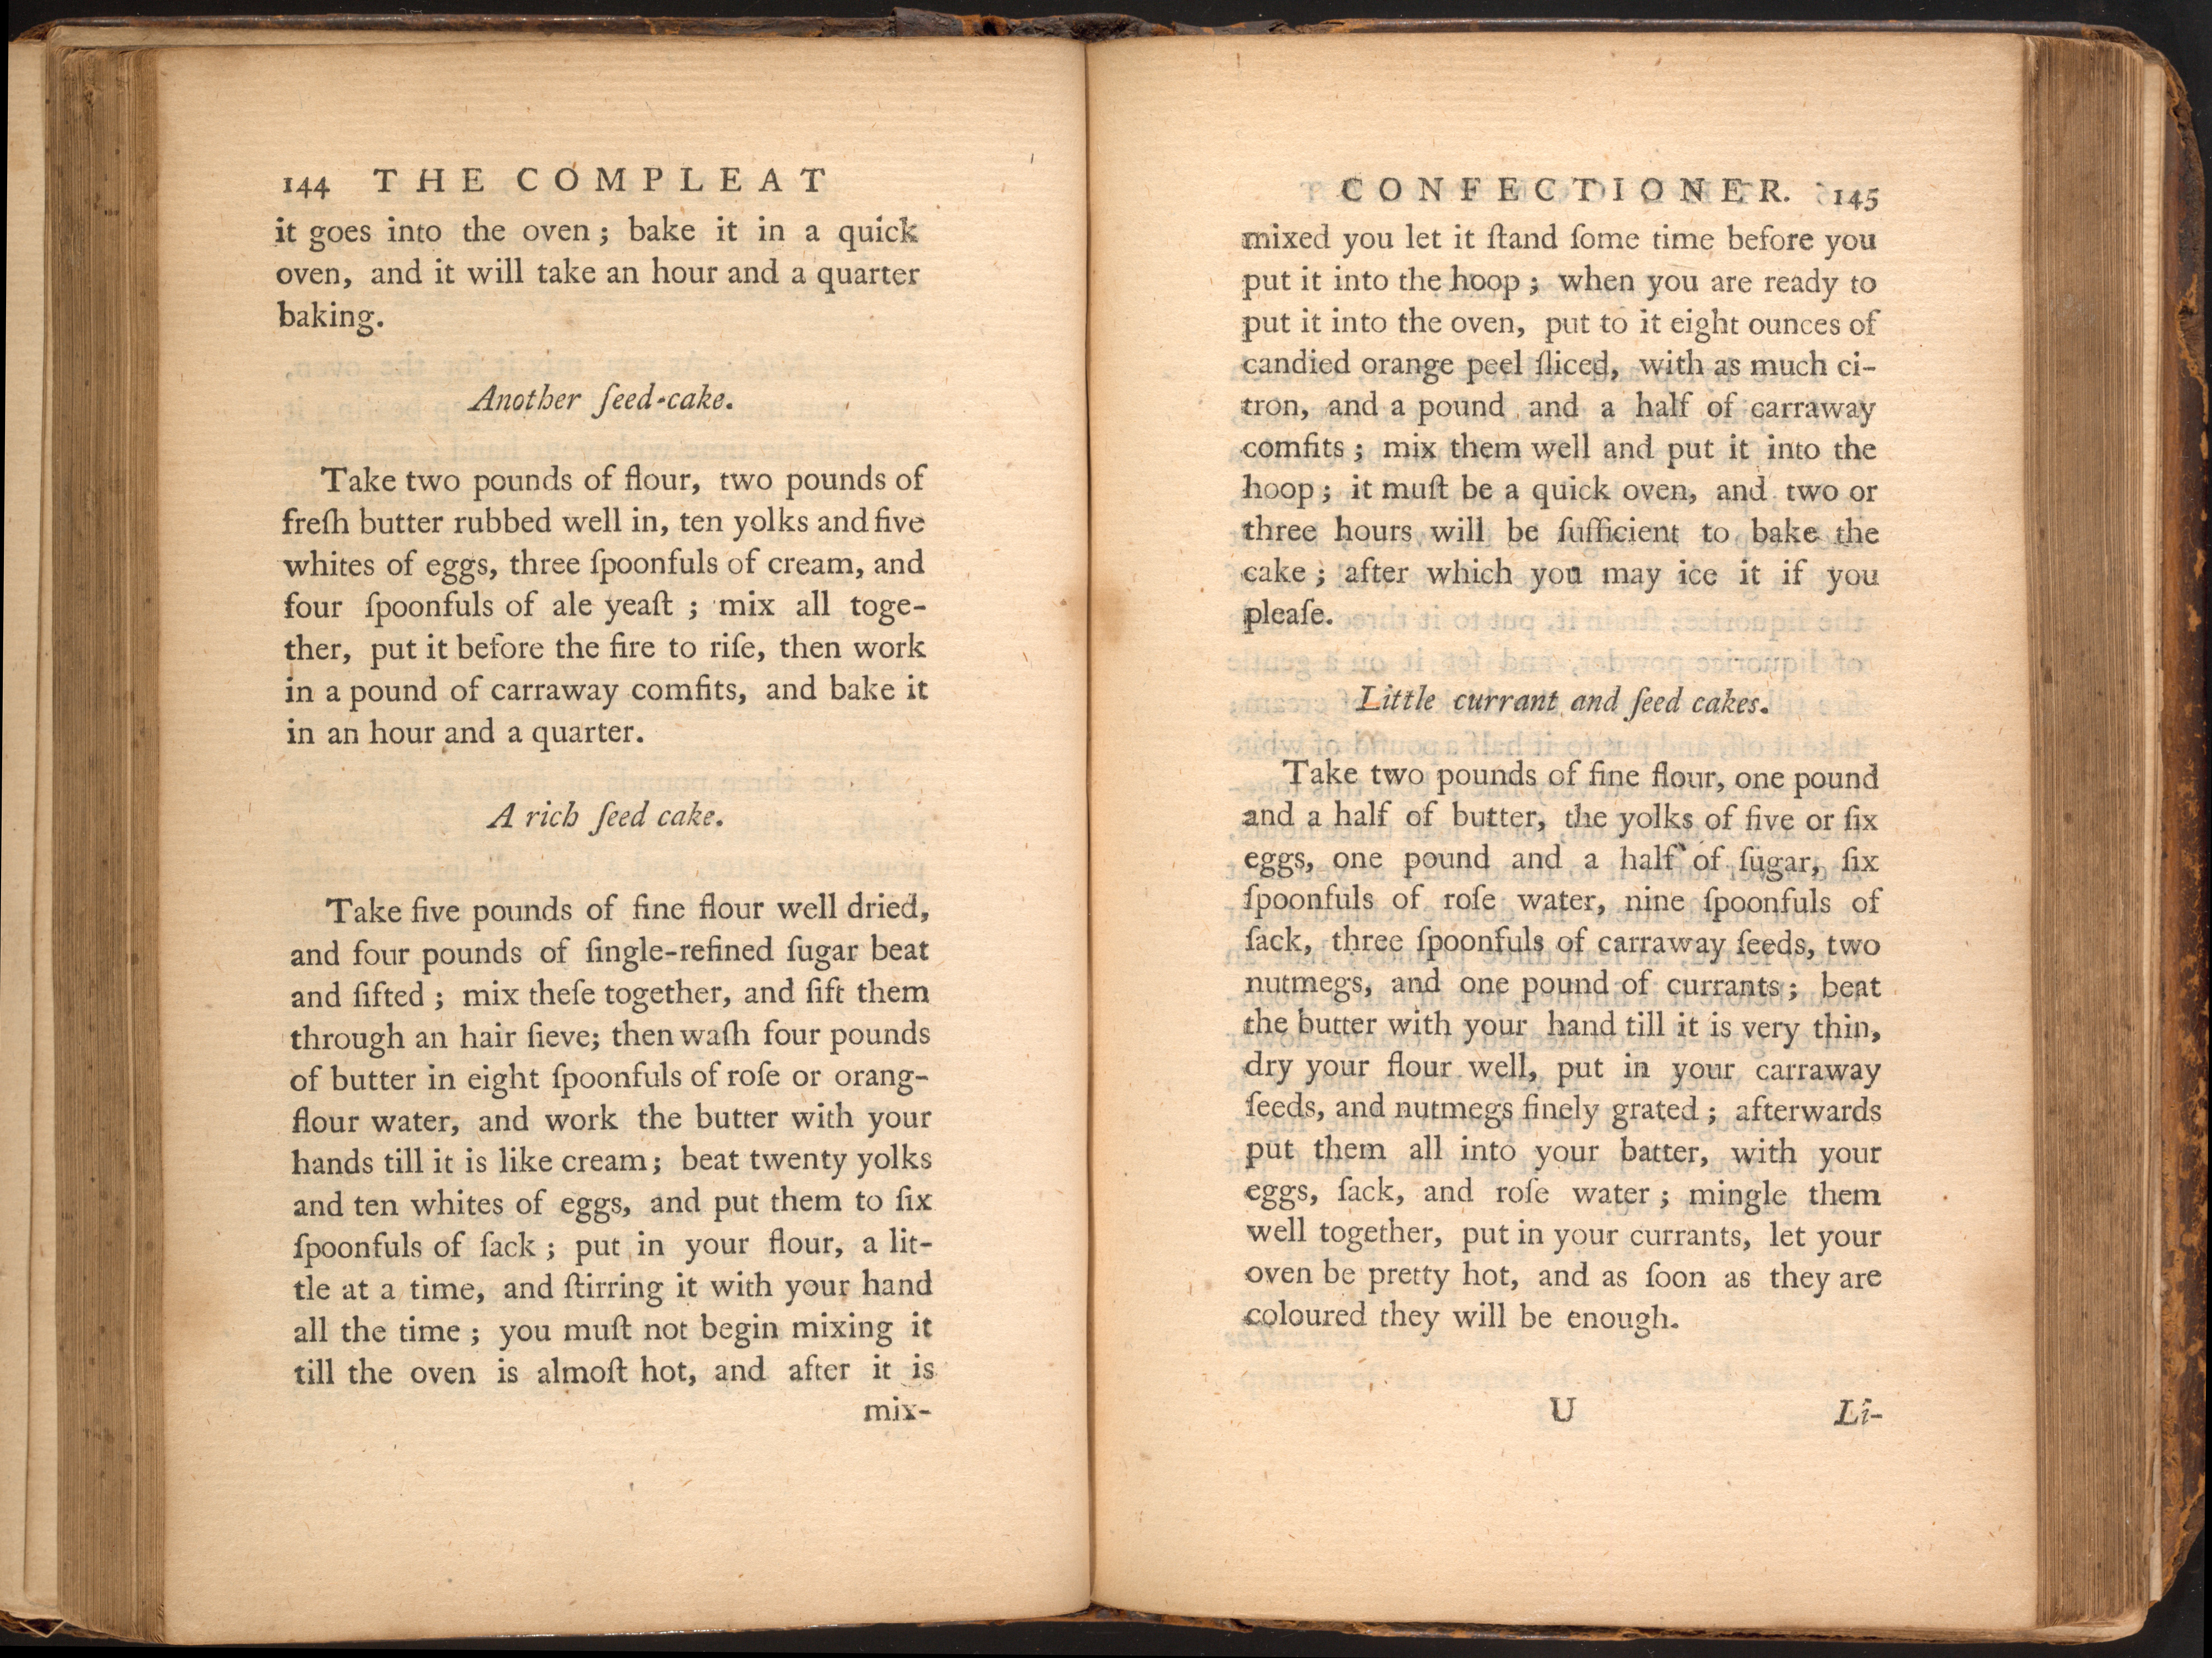 P. 142-45 from The Complete Confectioner; or, the Whole Art of Confectionery Made Plain and Easy. 